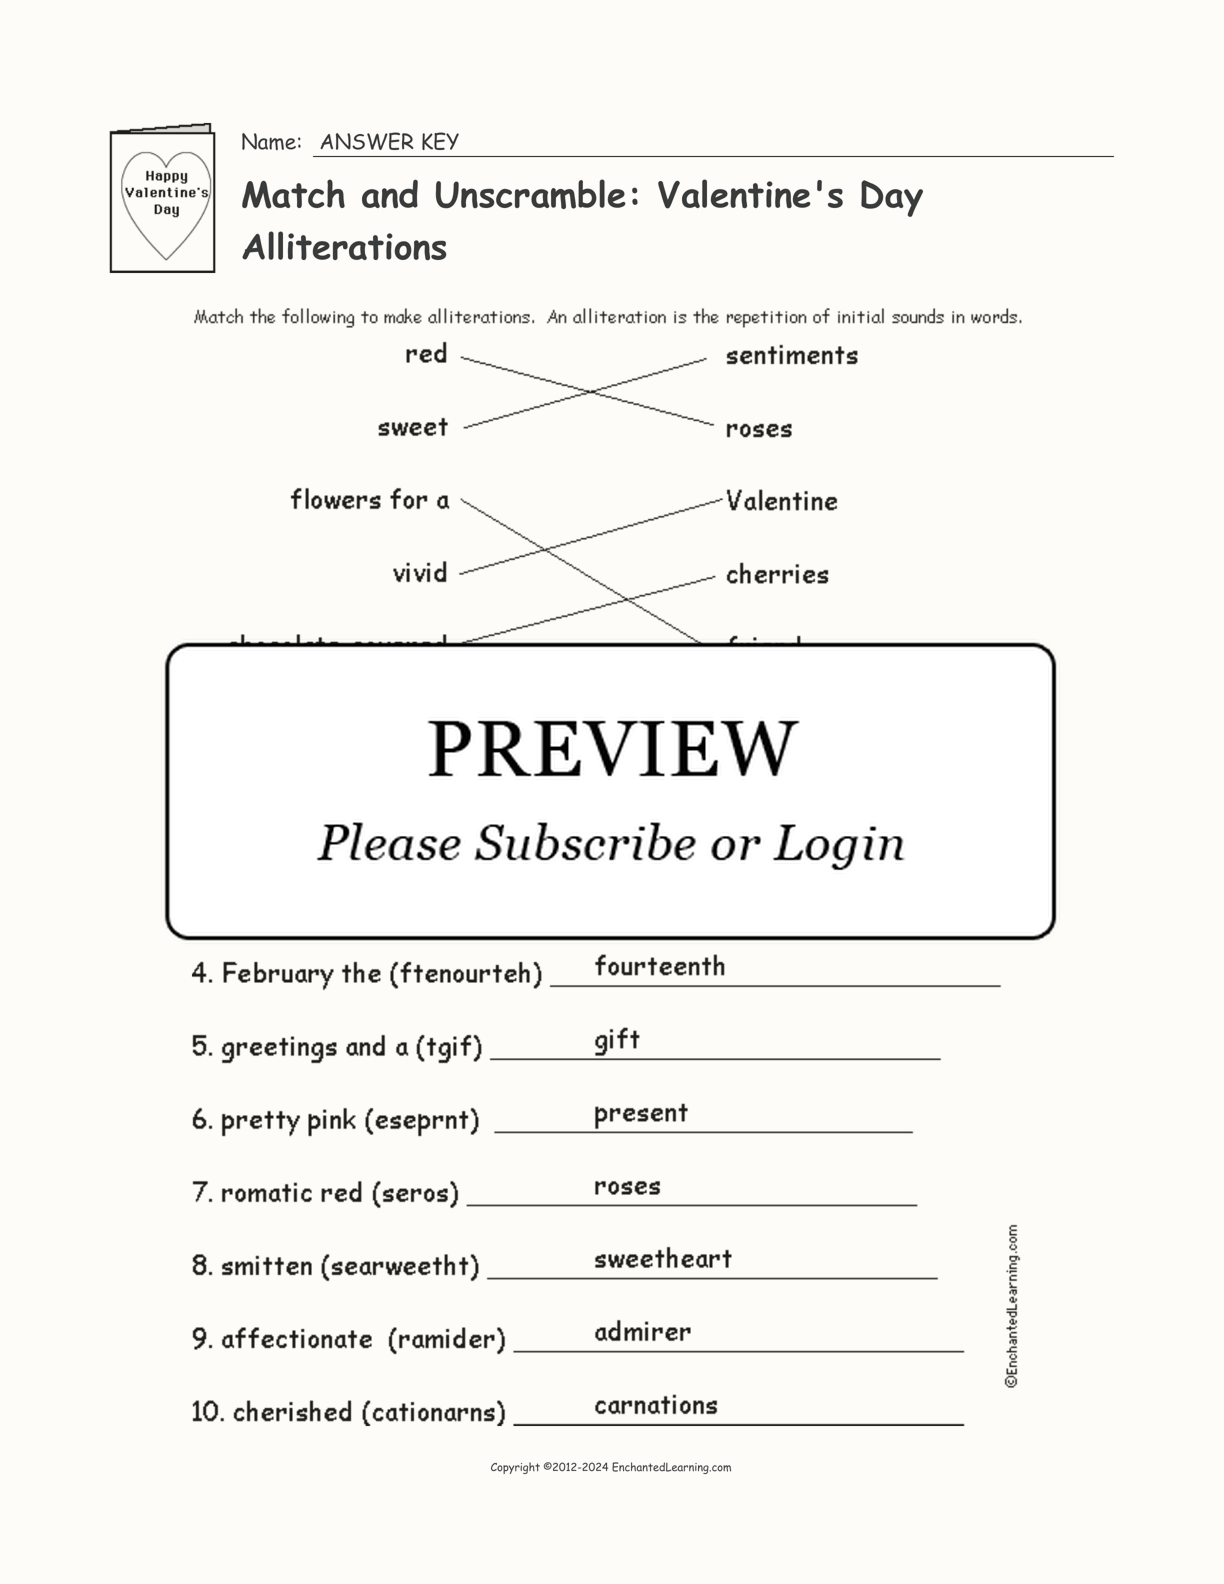 Match and Unscramble: Valentine's Day Alliterations interactive worksheet page 2